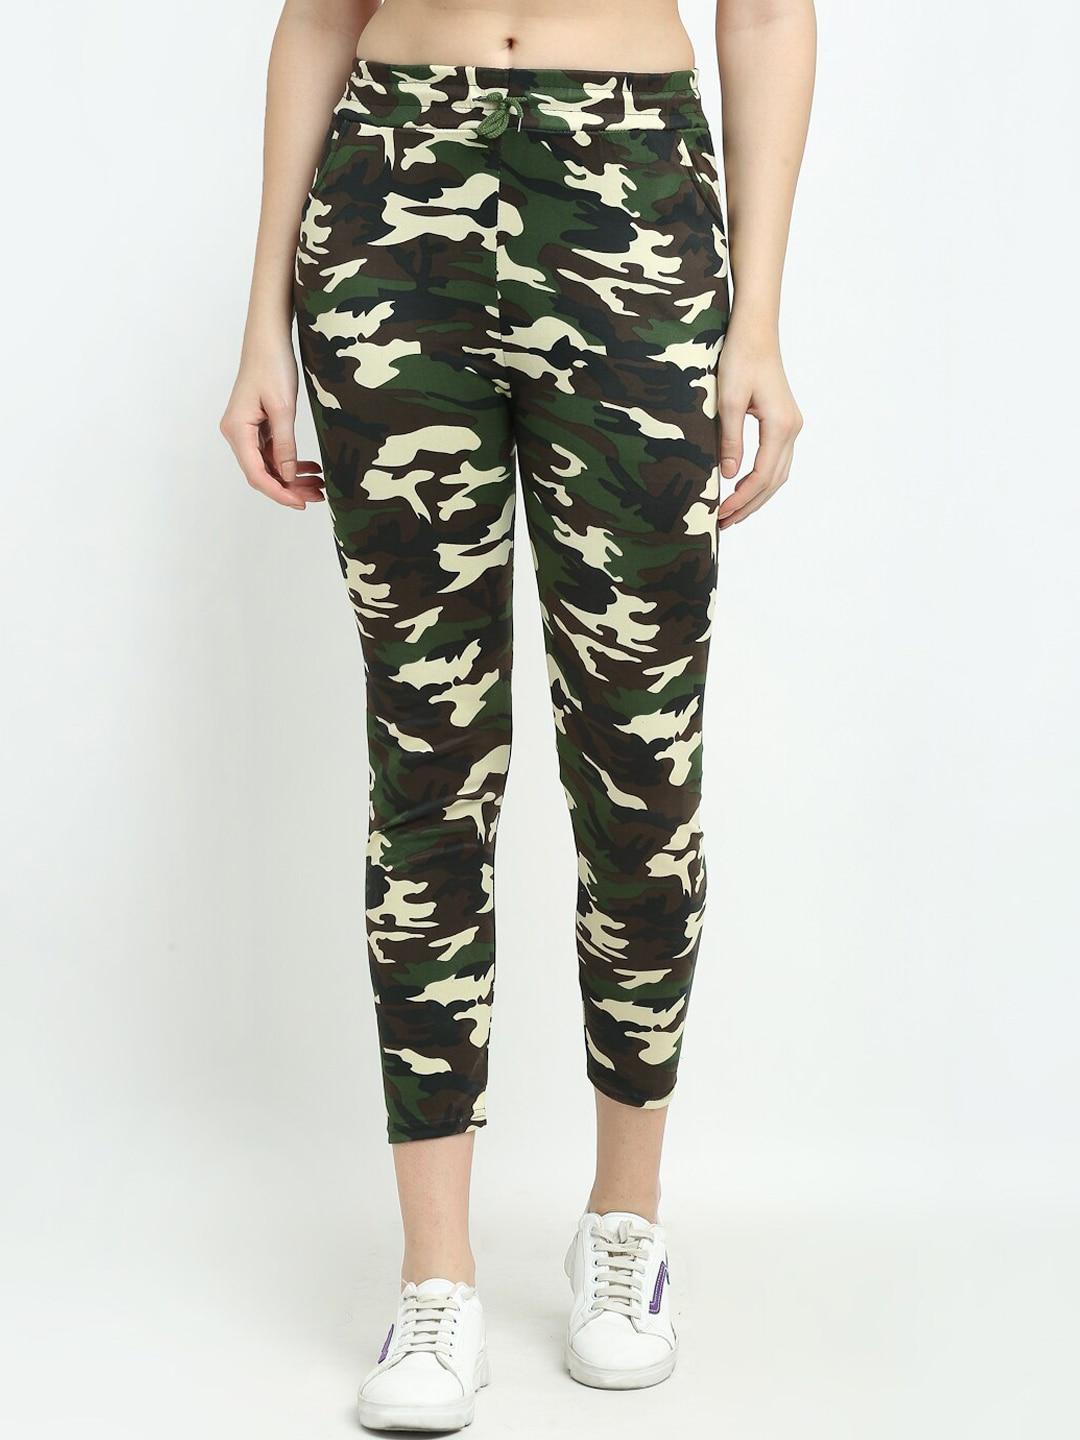 tag 7 women green & beige camouflage printed trousers